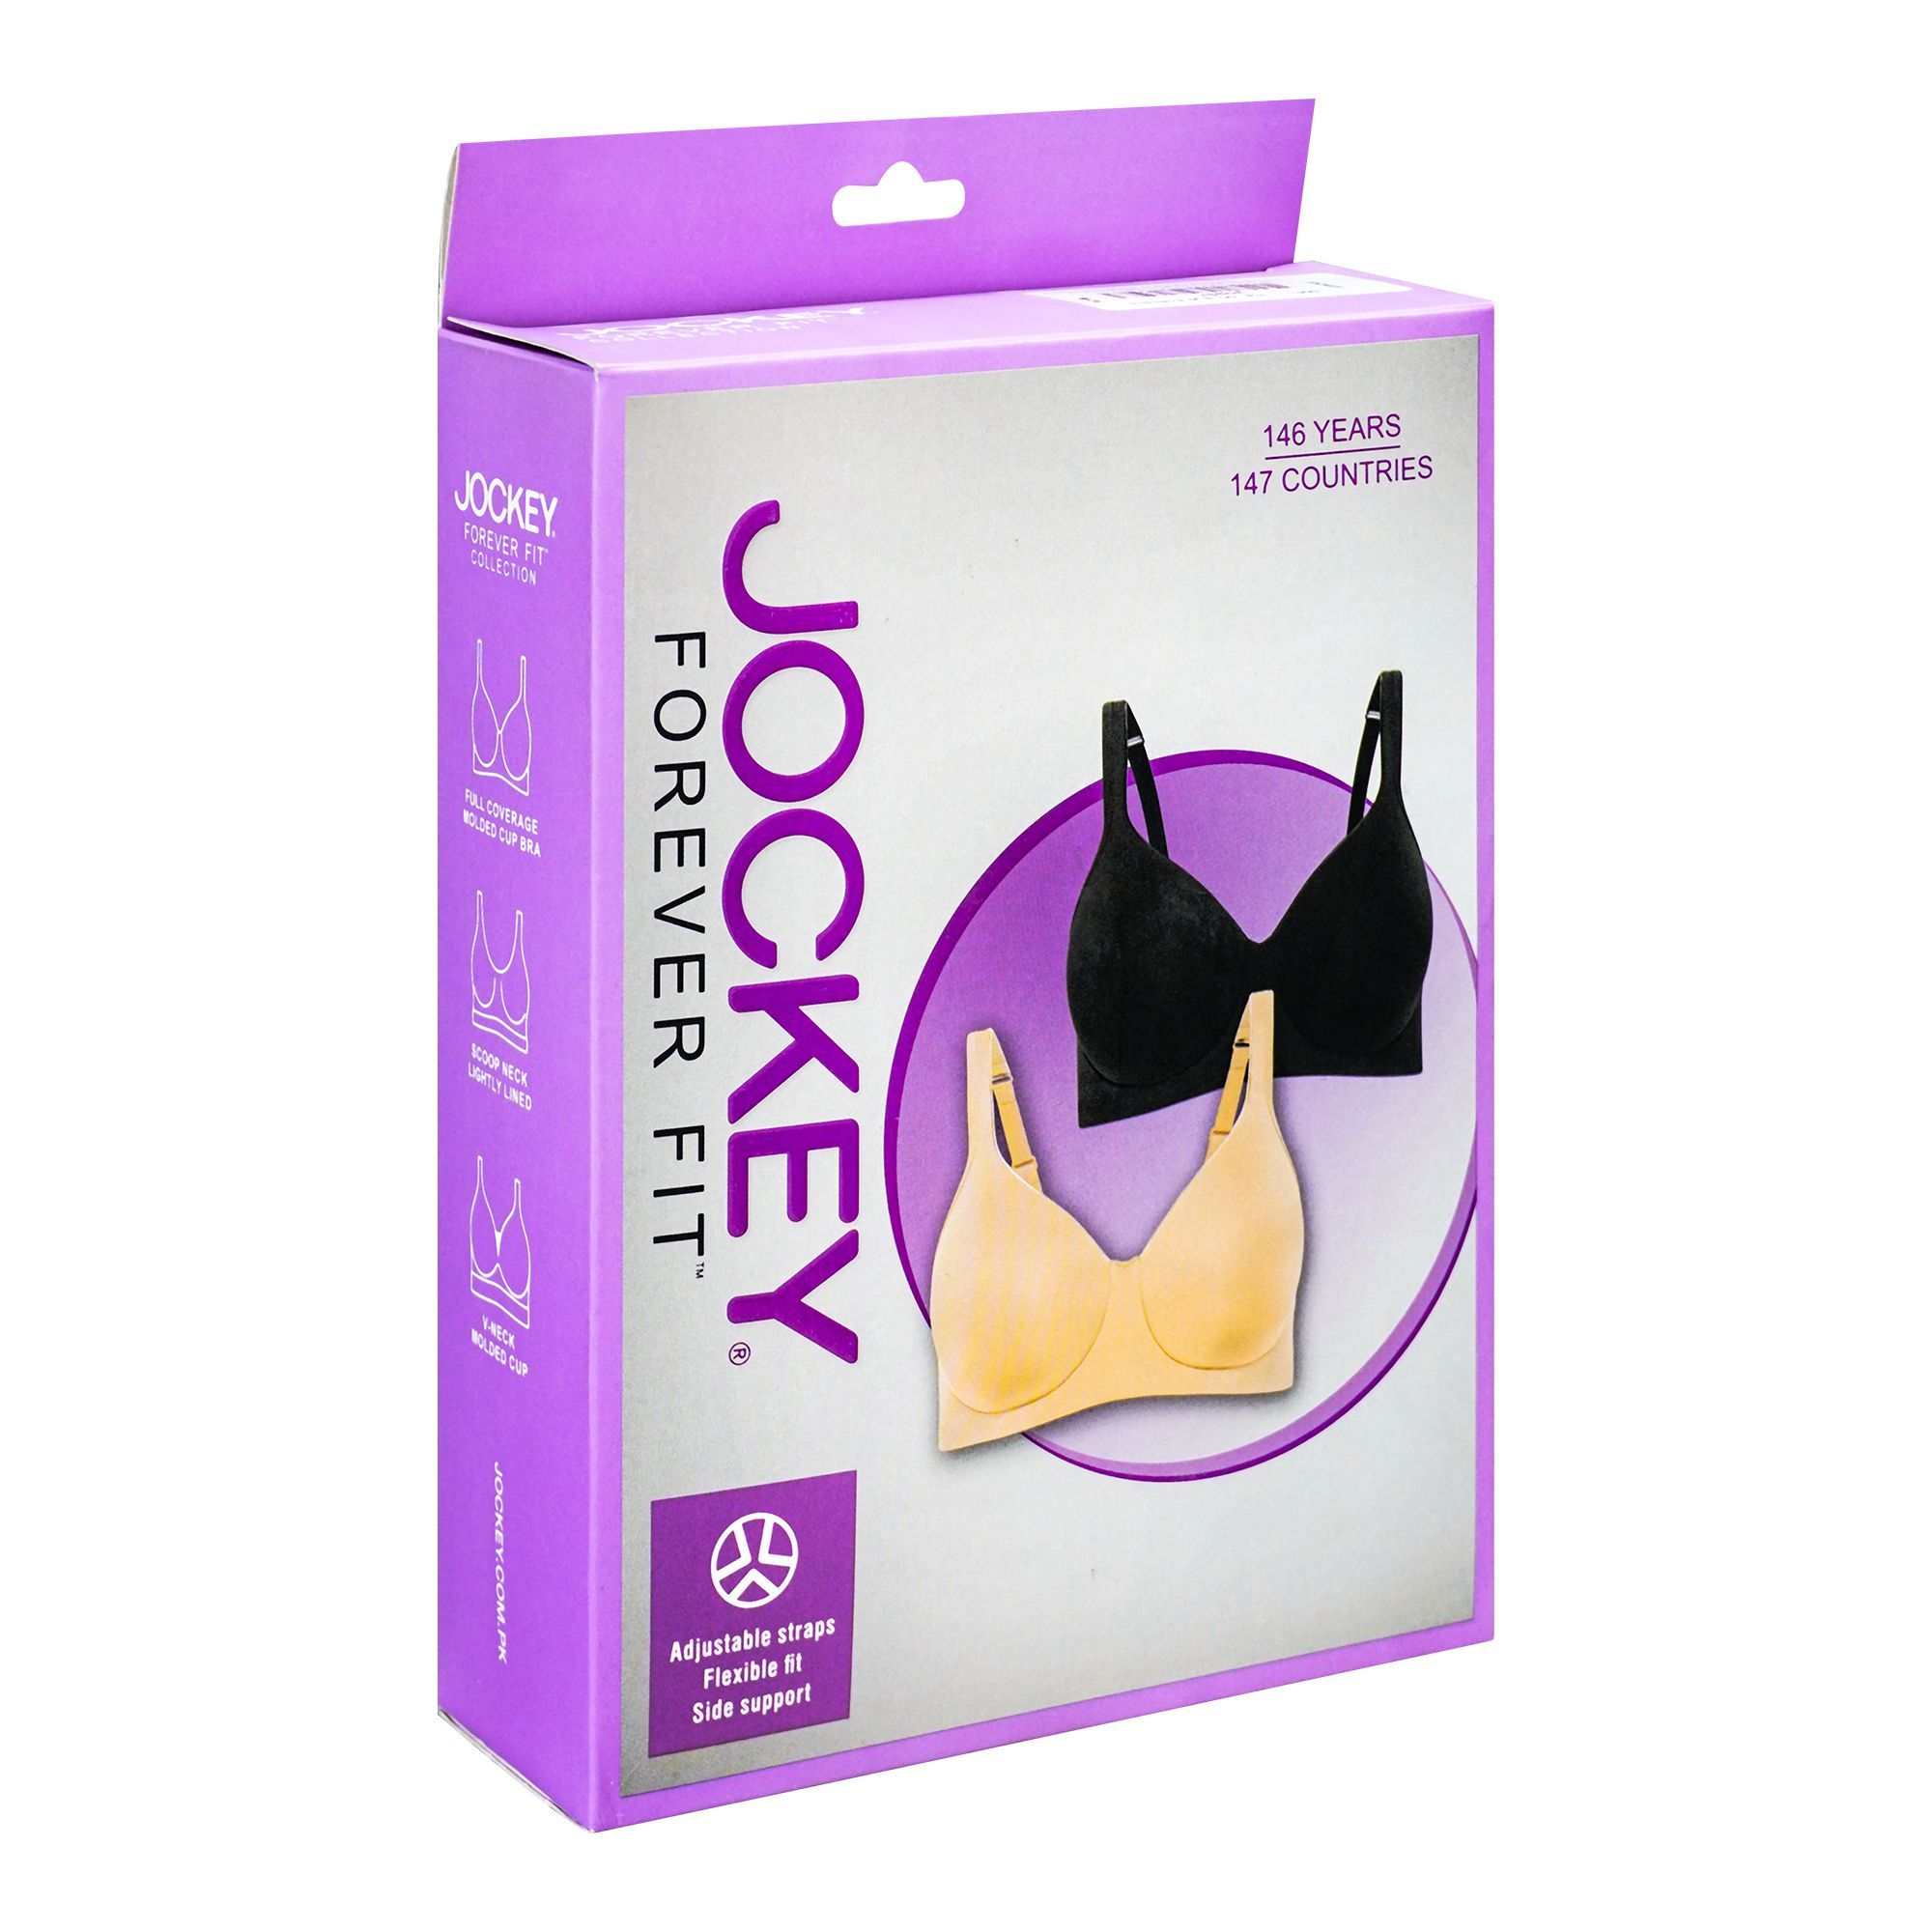 Buy Jockey Forever Fit Full Coverage Molded Cup Bra, Cream Tan, 2996H ...